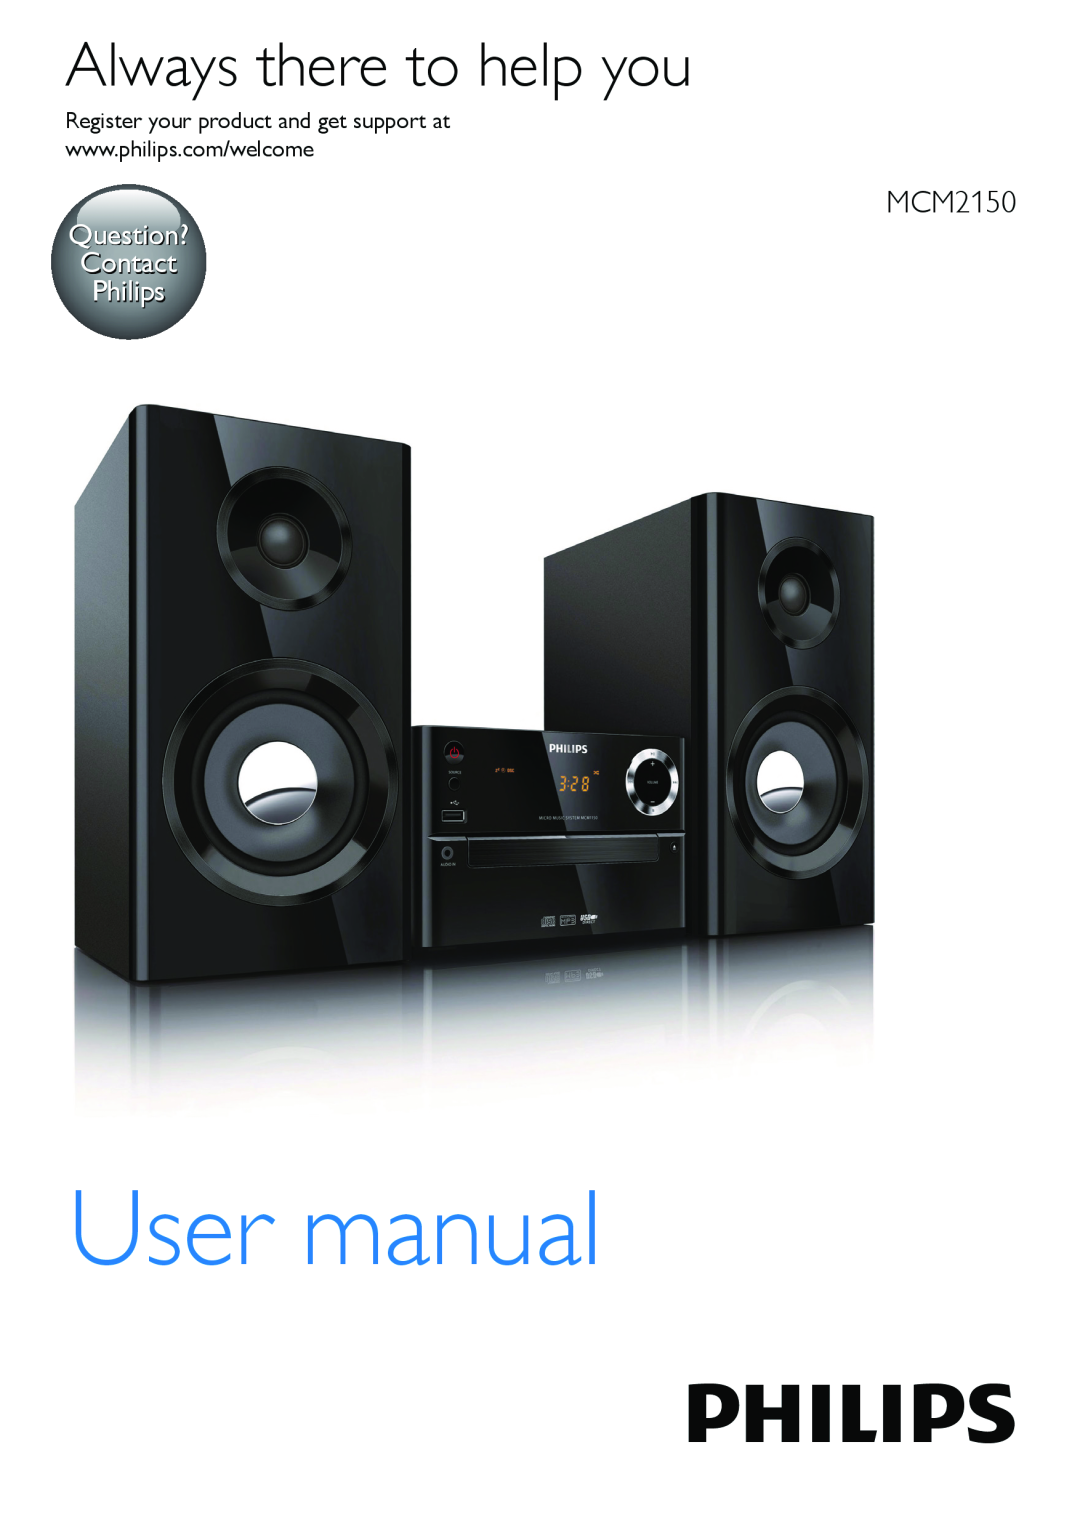 Philips MCM2150 user manual Always there to help you, Question? Contact Philips 